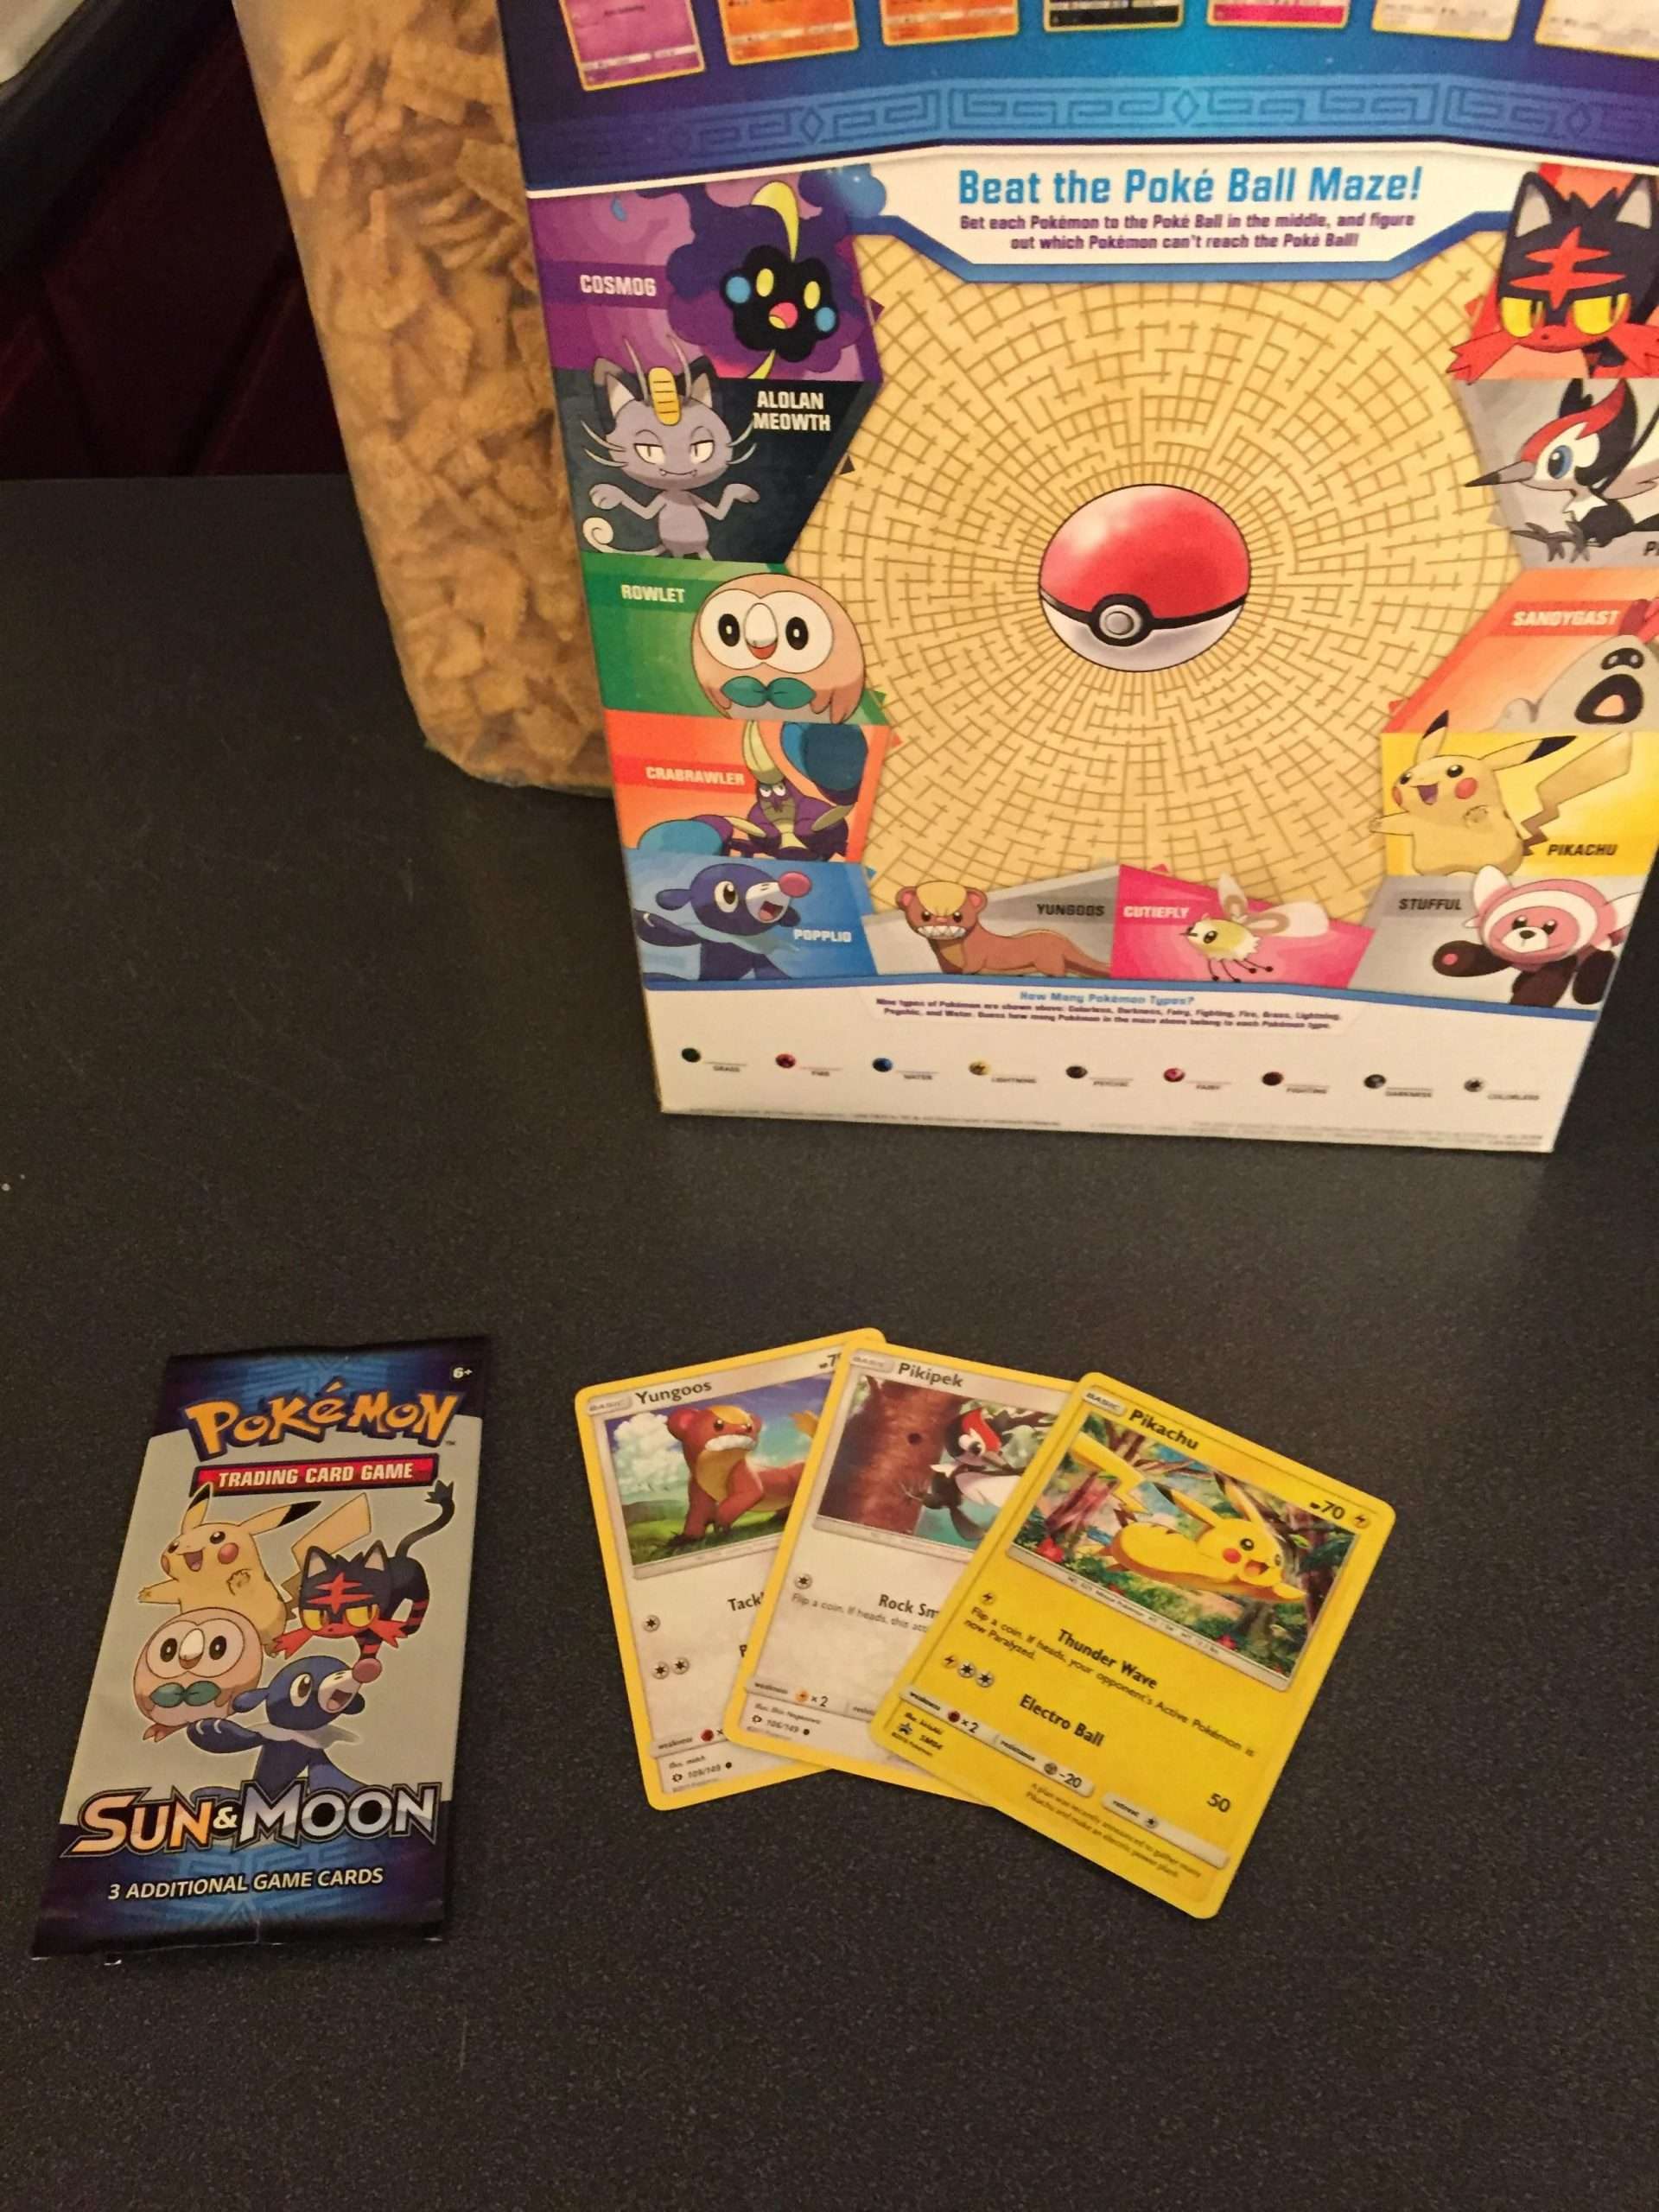 My Cinnamon Toast Crunch came with a pack of Pokemon cards in it ...